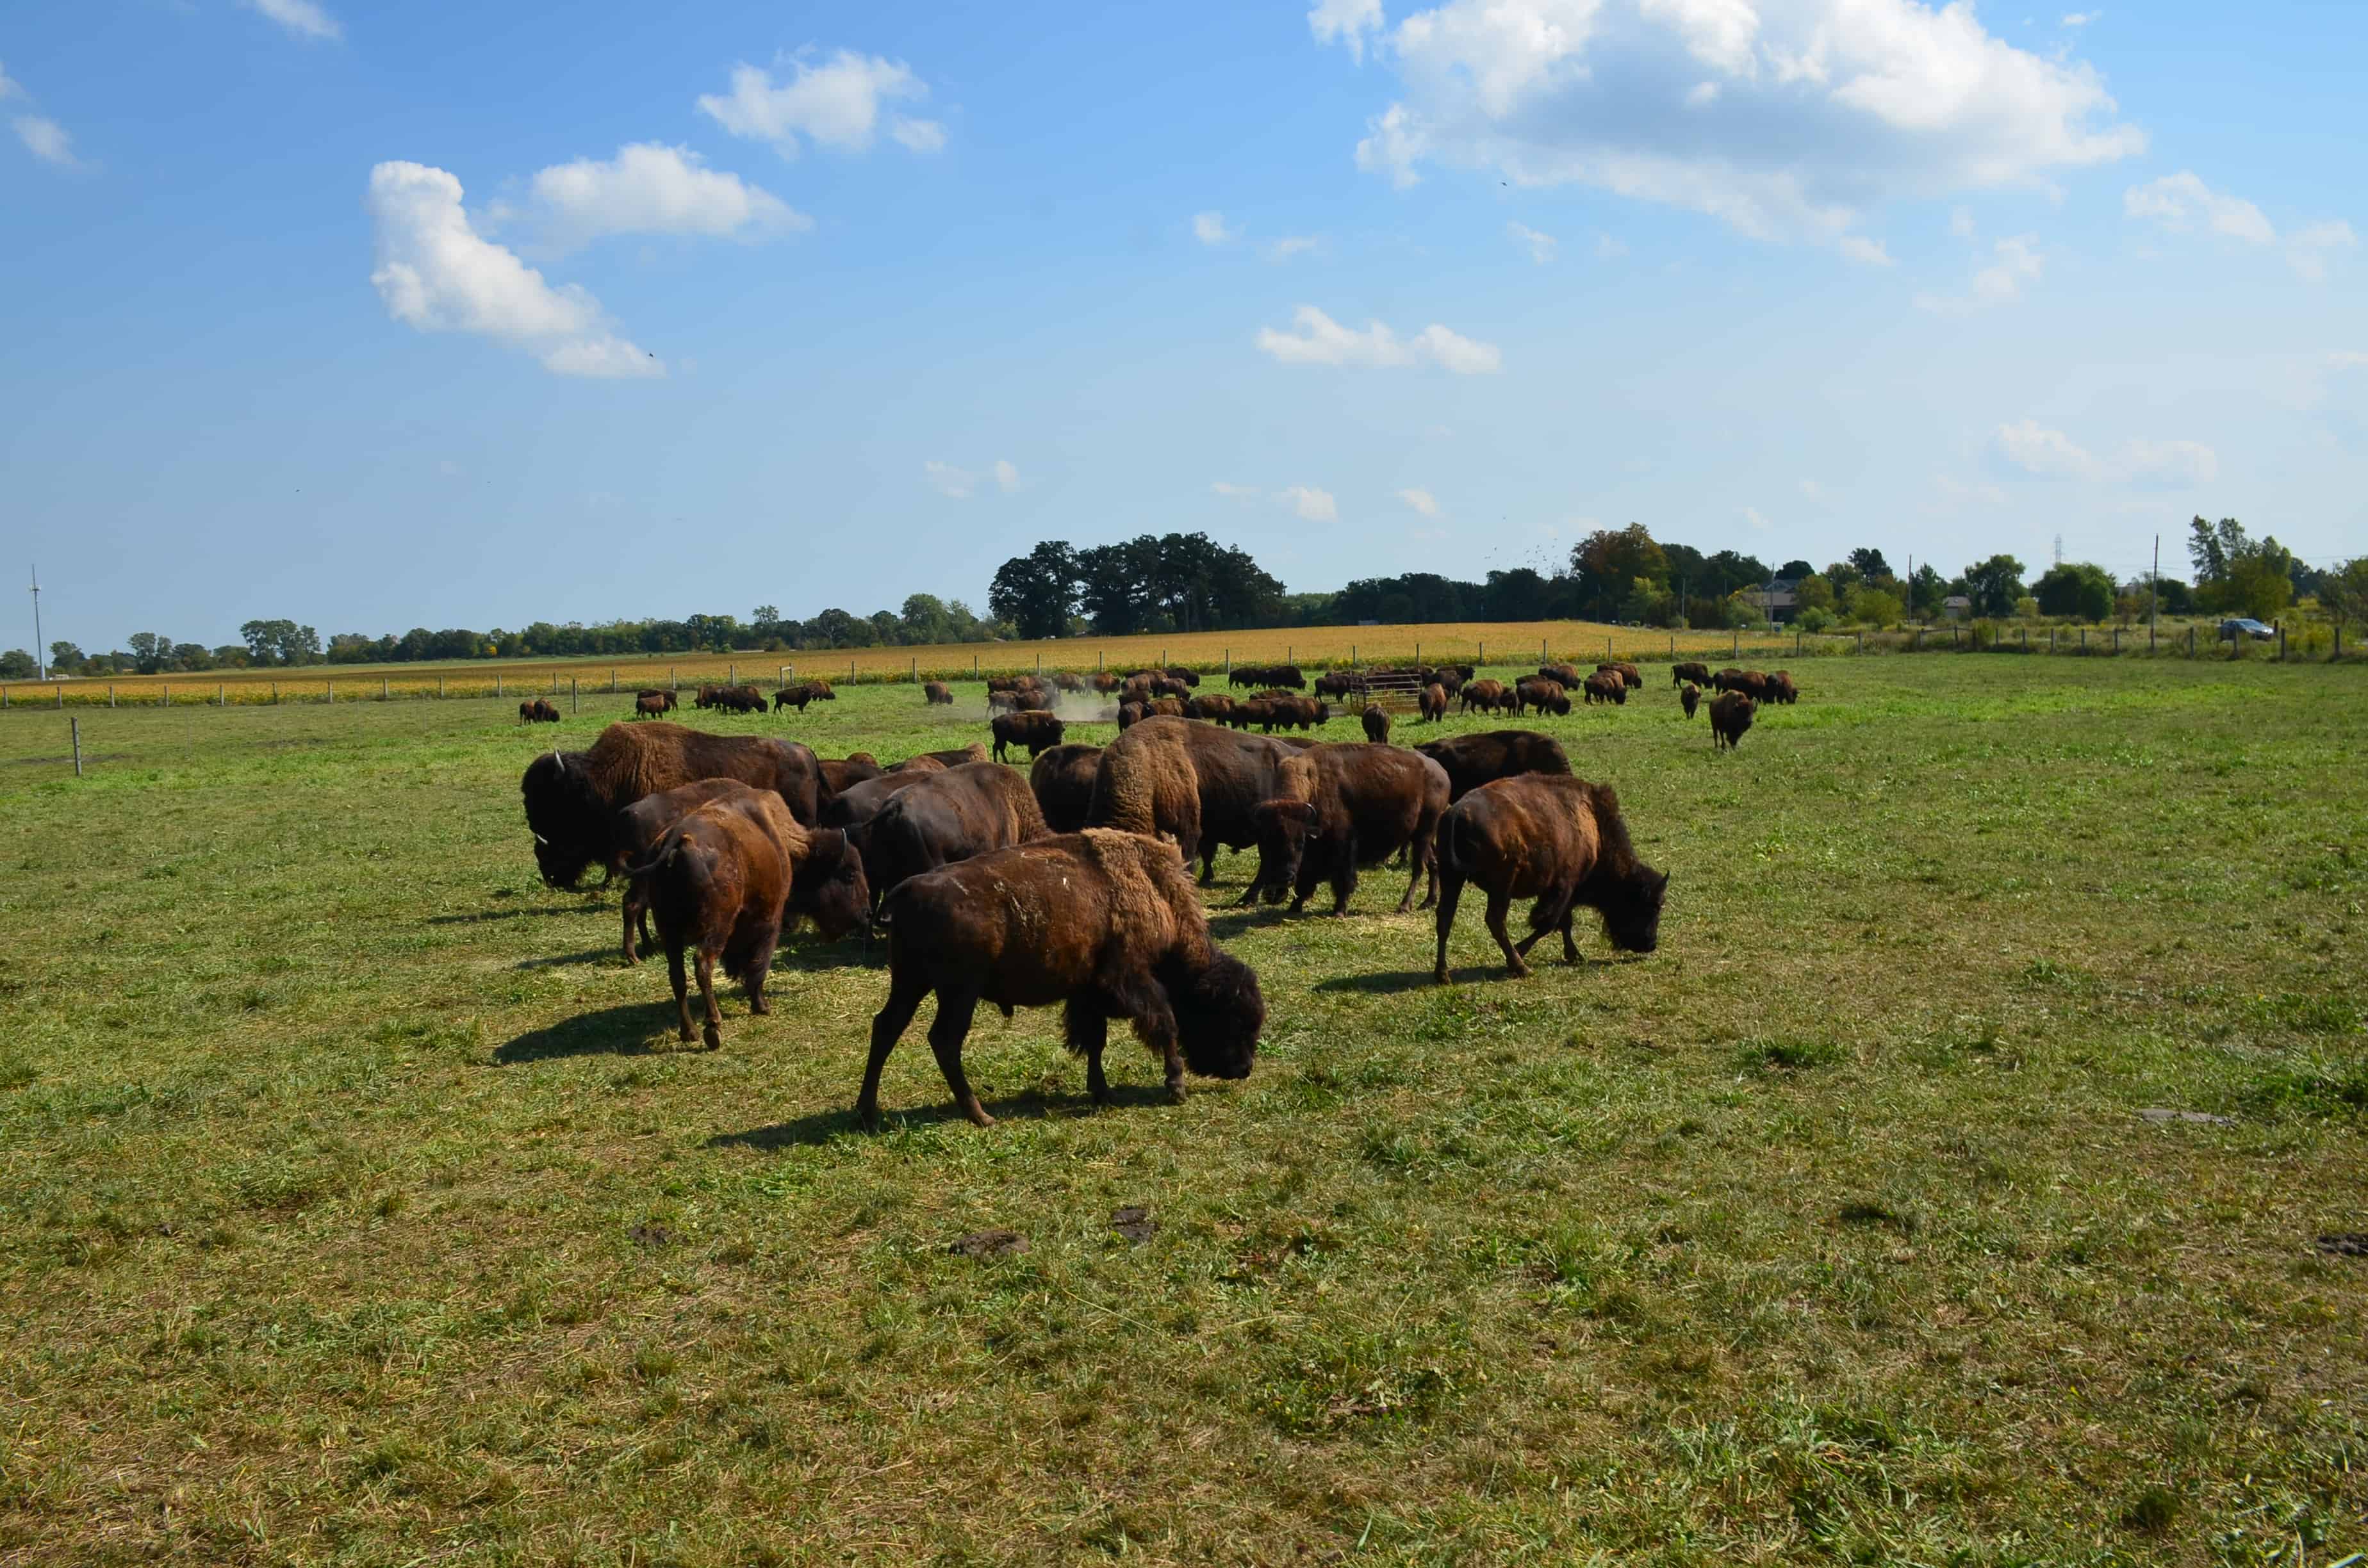 Bison grazing at the ranch